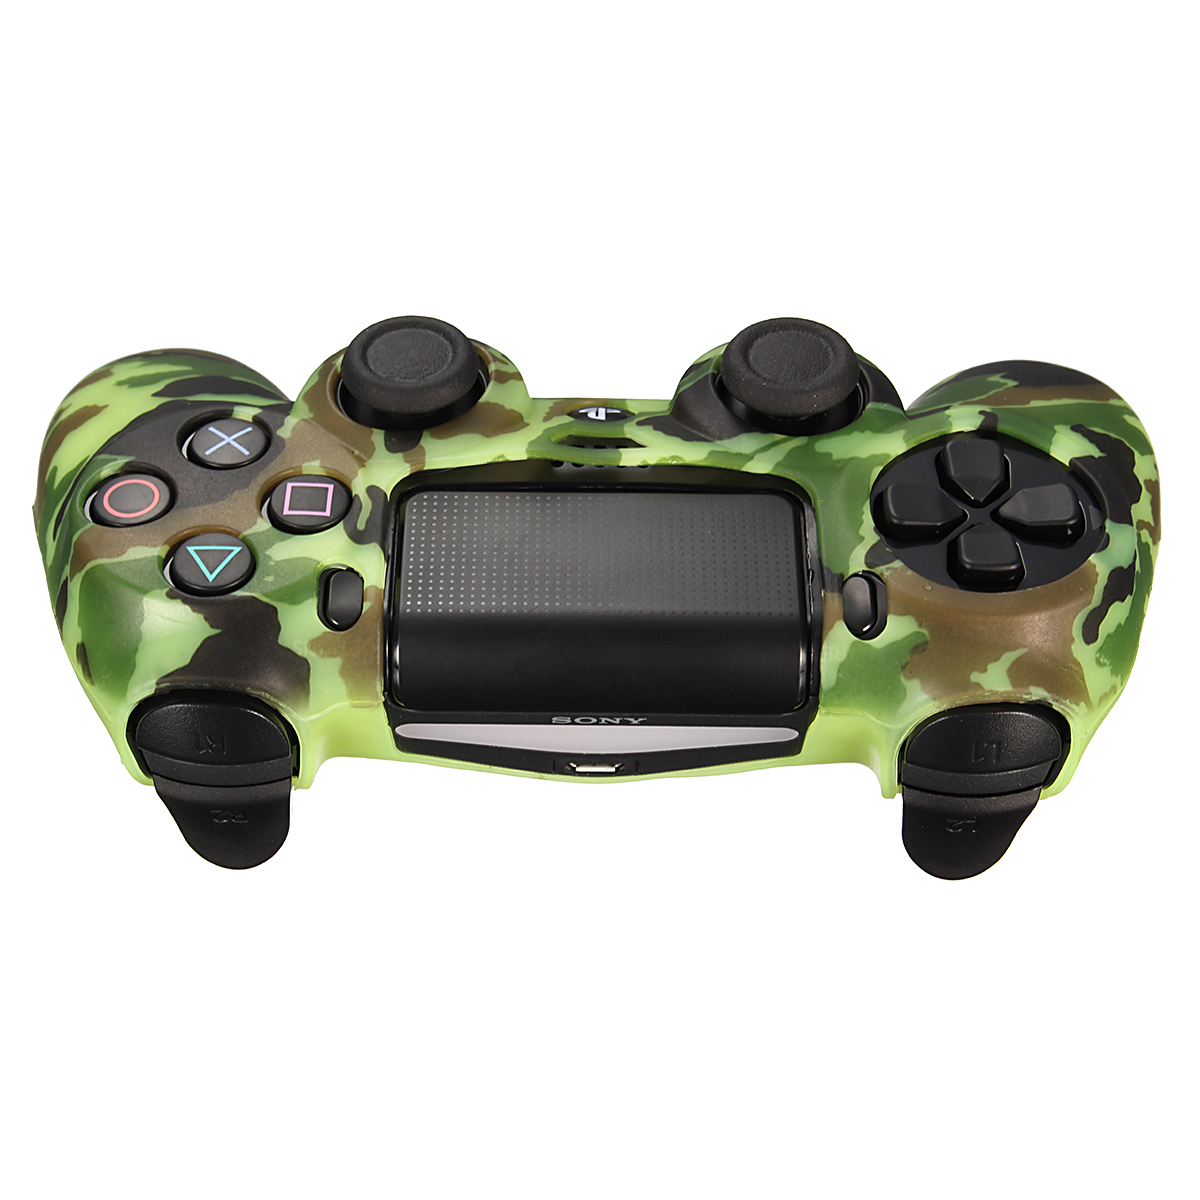 Durable Decal Camouflage Grip Cover Case Silicone Rubber Soft Skin Protector for Playstation 4 for Dualshock 4 Gamepad 25